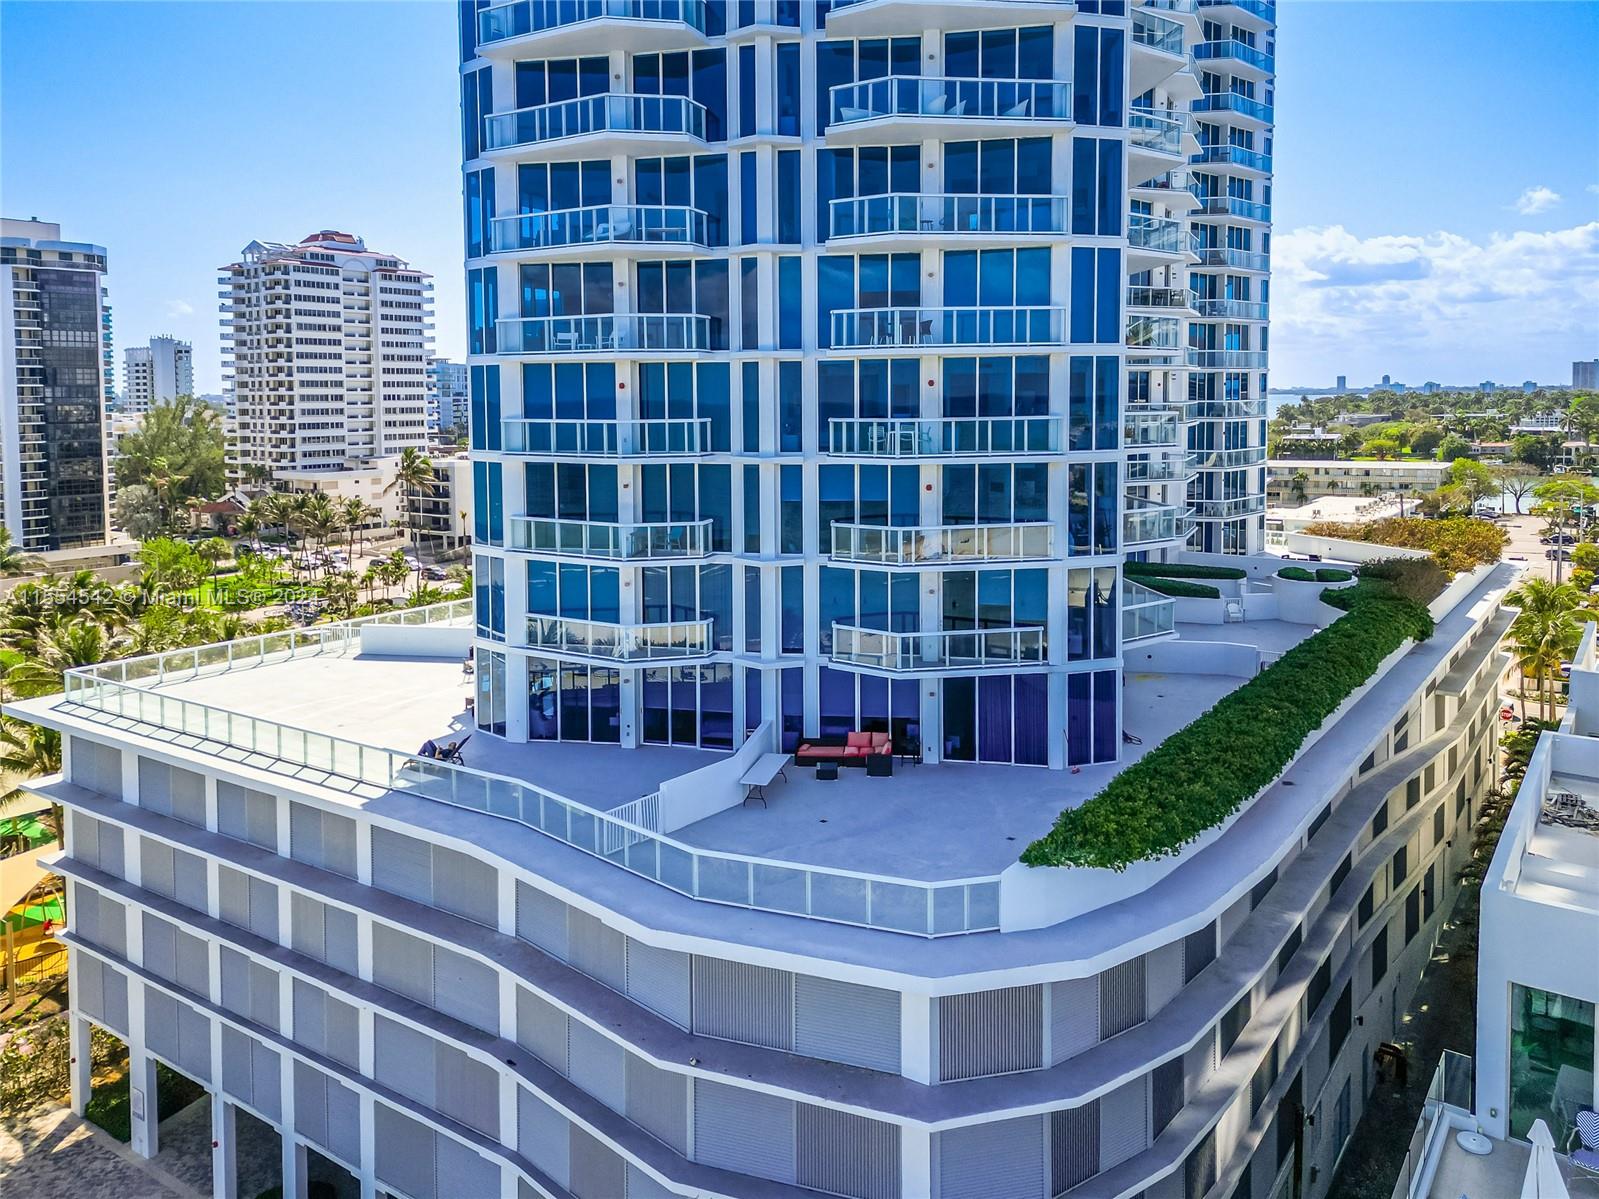 Beautiful condo with 2 bedrooms and 2 bathrooms located in one-of-a-kind boutique building. Enjoy the convenience of the building's amenities, including a heated pool, jacuzzi, gym overlooking the bay and 2 assigned garage parking spaces. Don't miss your chance to live in one of the most desirable neighborhoods in Miami just next door to a small park. Excellent location.